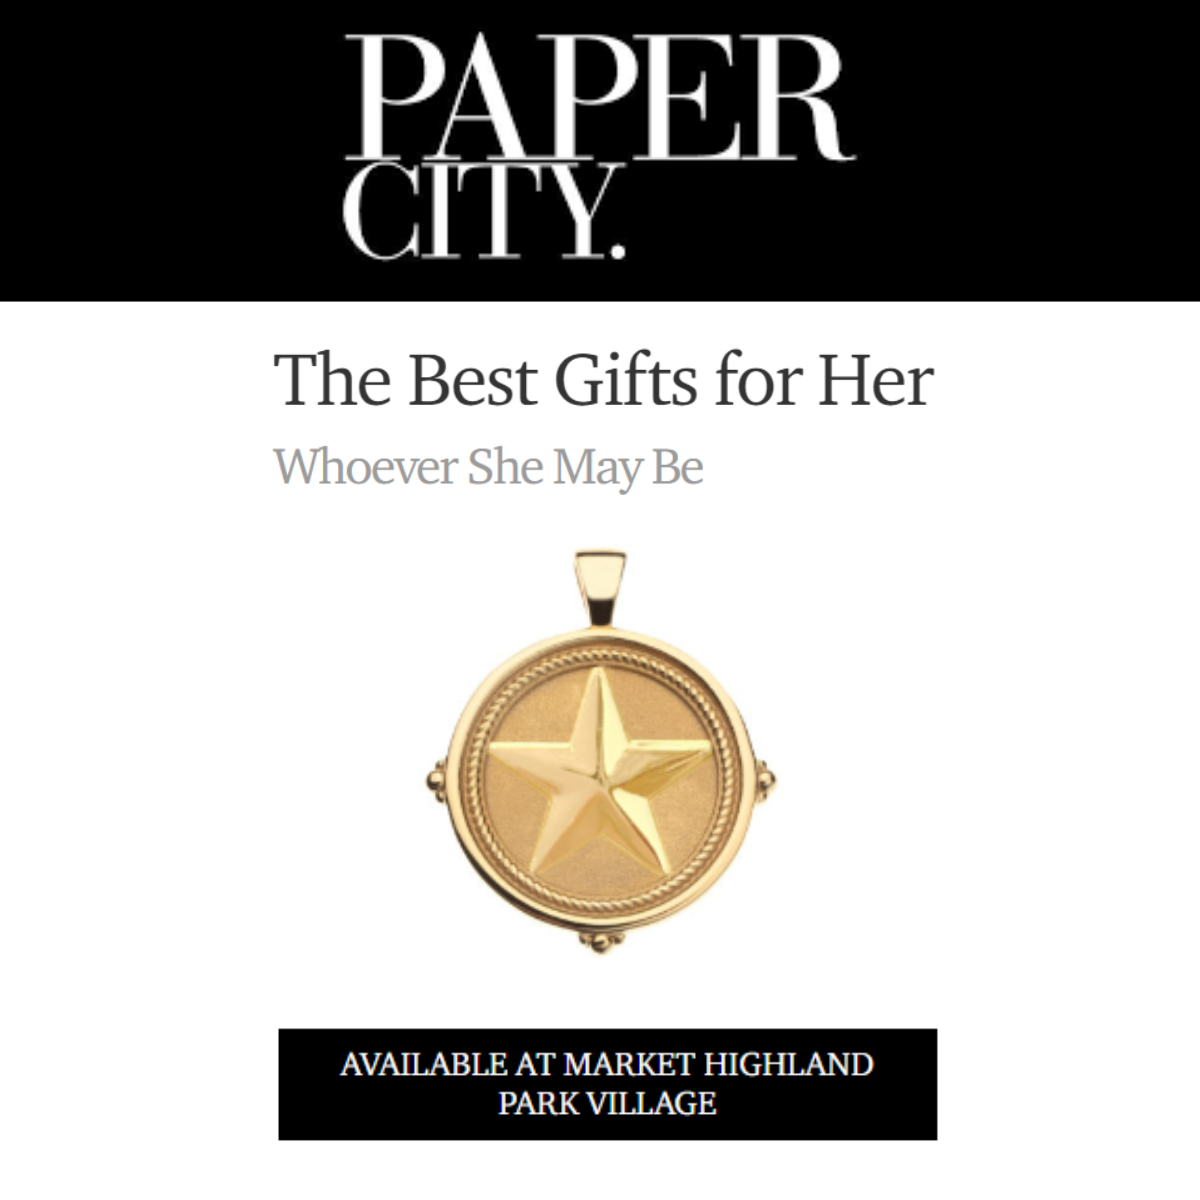 Press Highlight: Paper City Best Gifts for Her